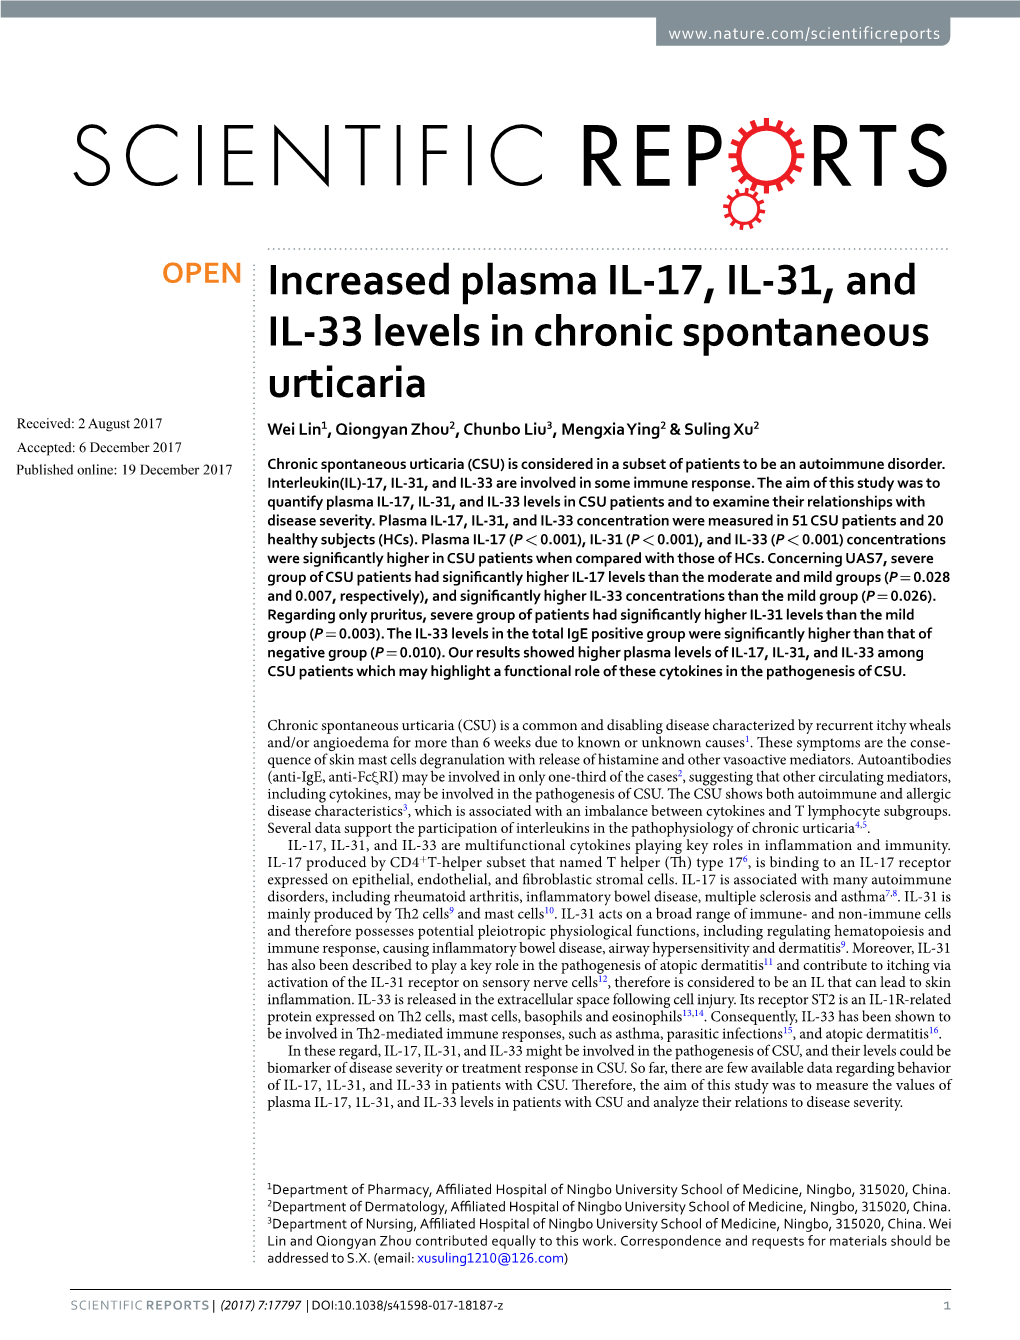 Increased Plasma IL-17, IL-31, and IL-33 Levels in Chronic Spontaneous